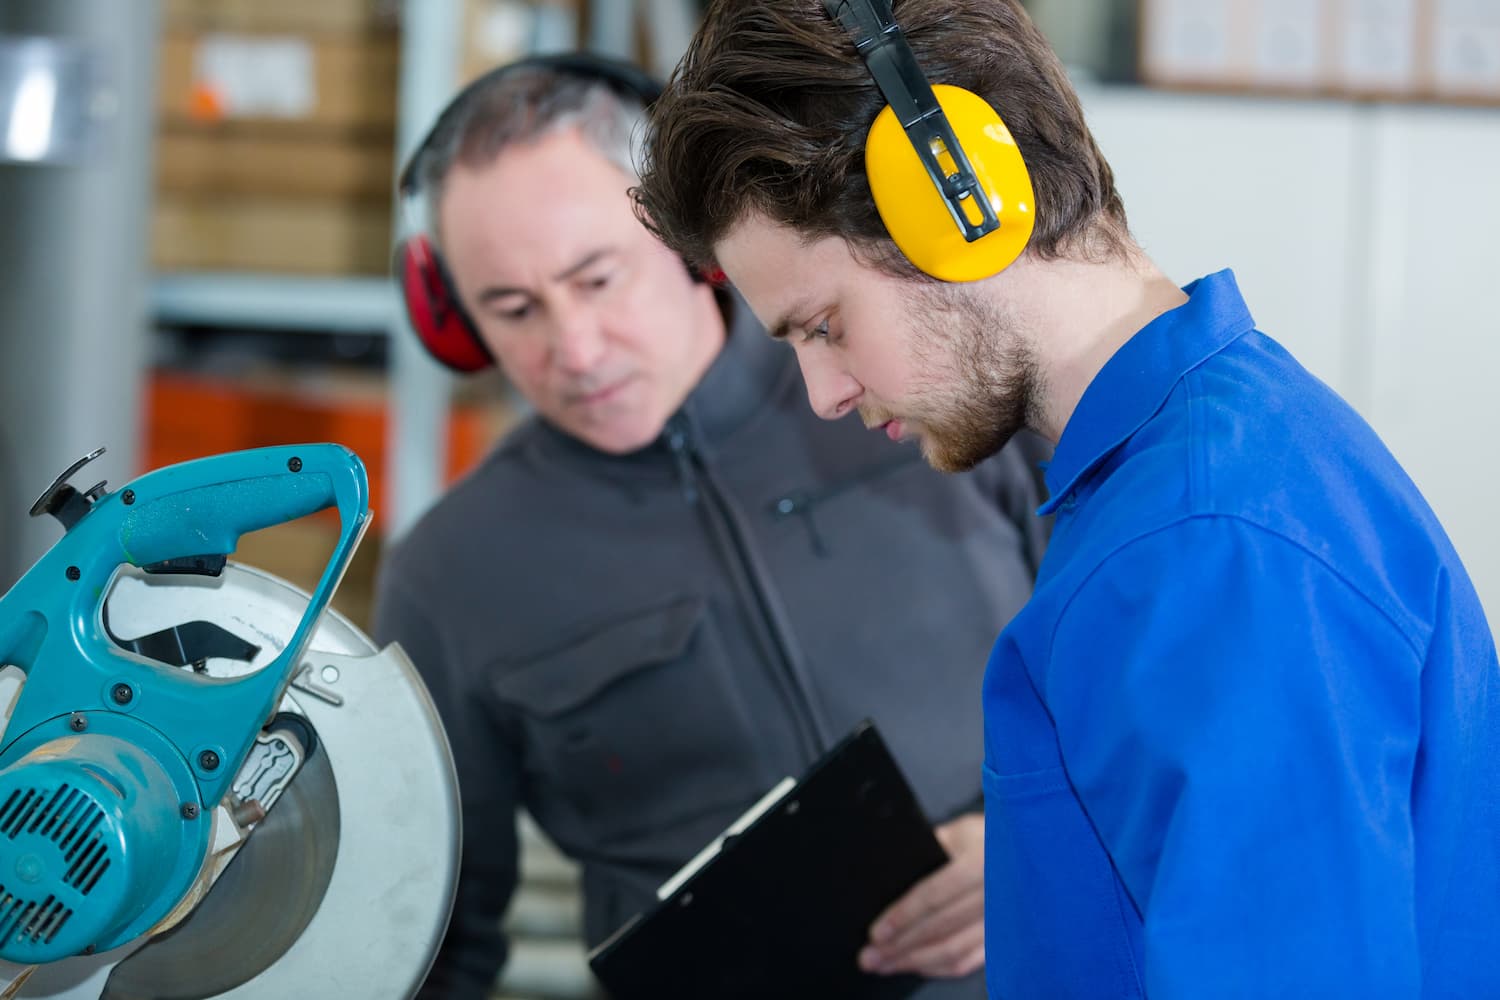 An Adelaide business conducts workplace noise assessments for staff safety